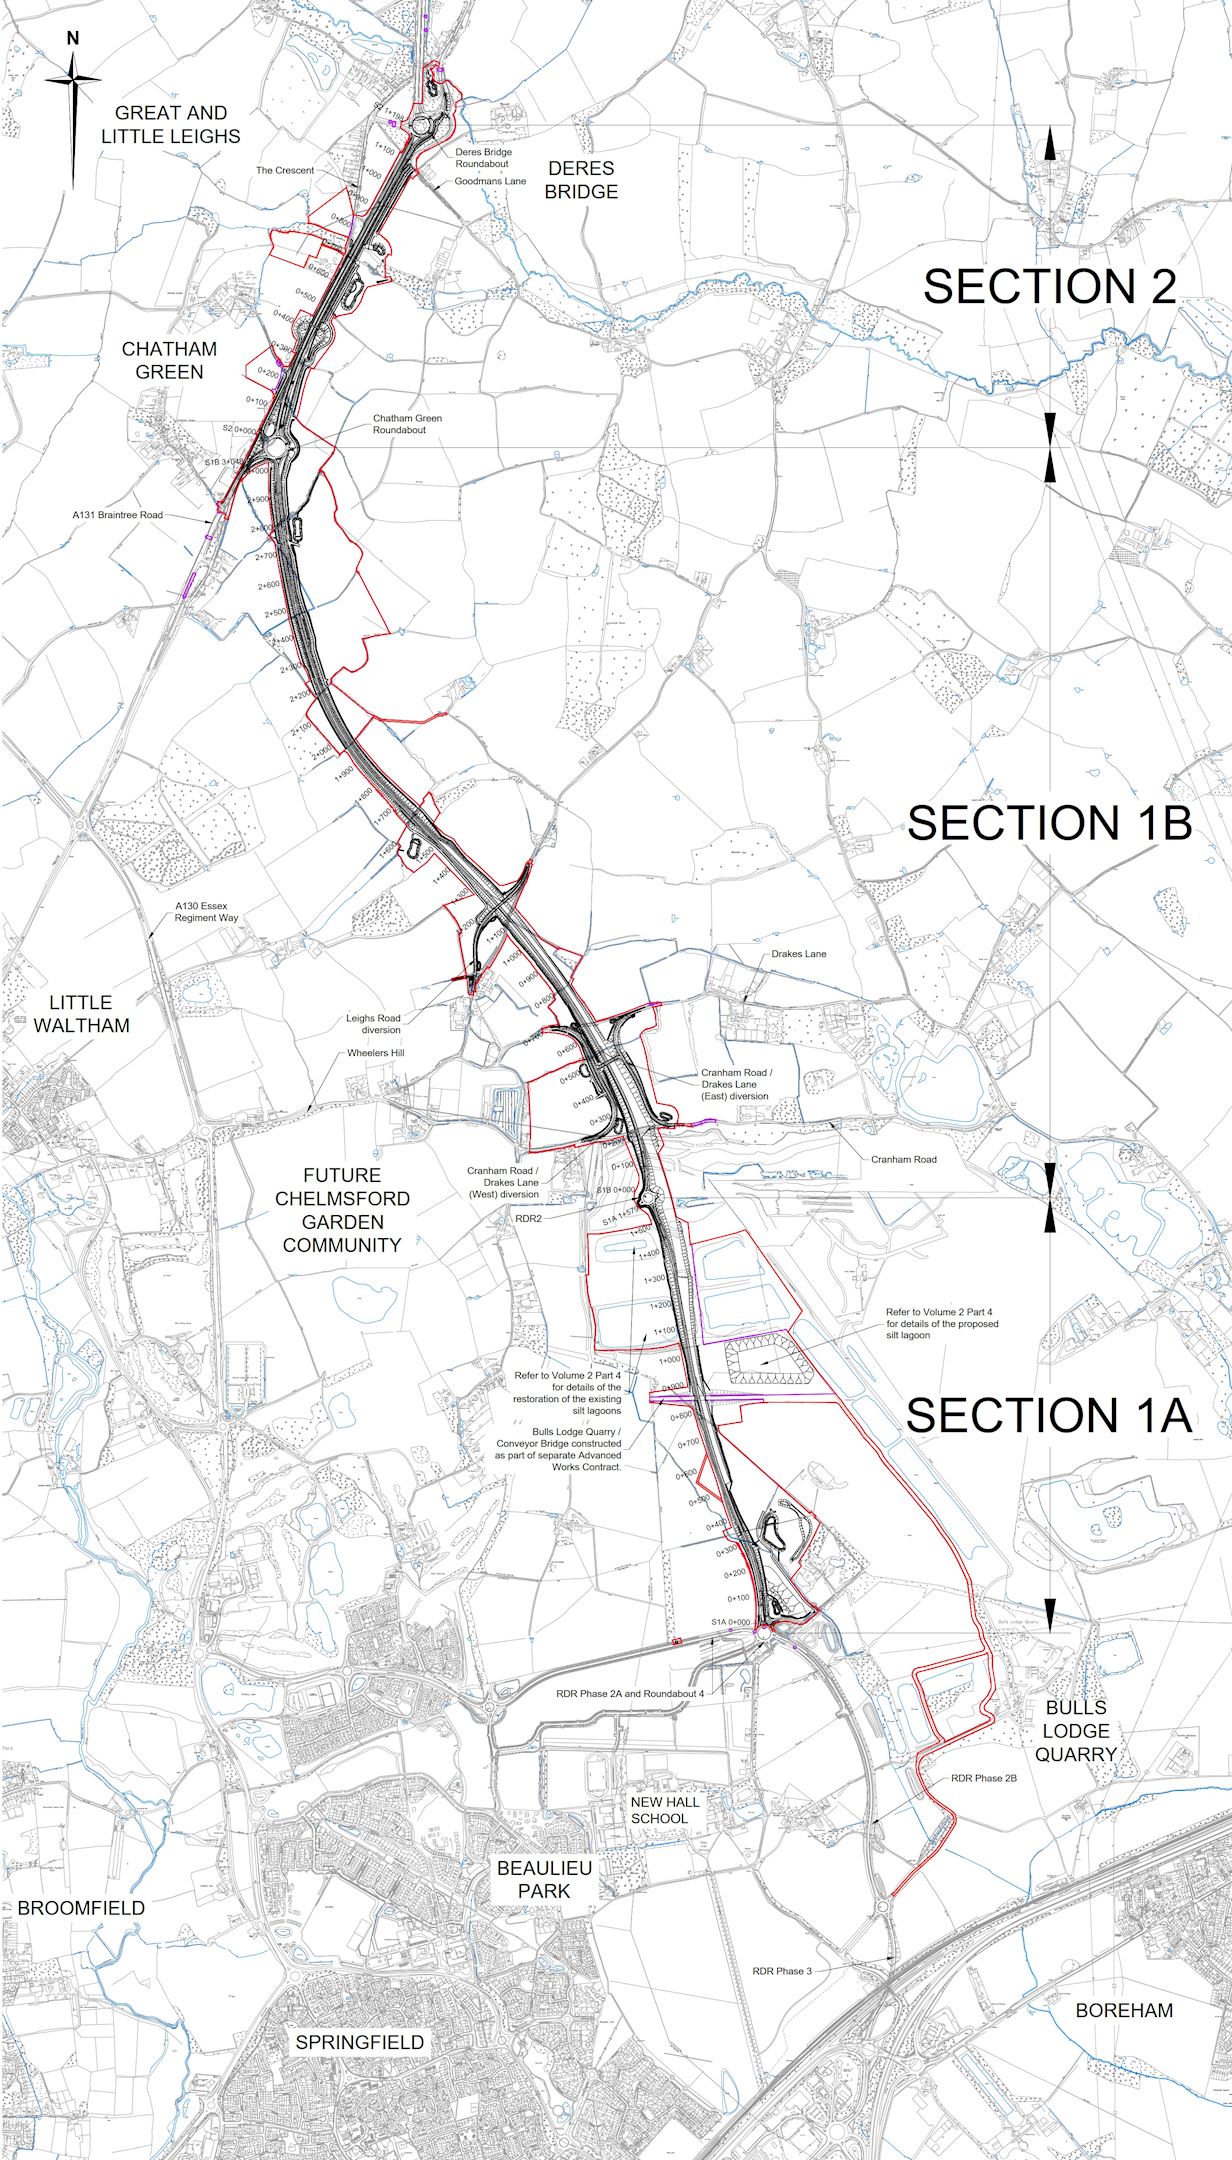 Design drawing showing the full bypass scheme route